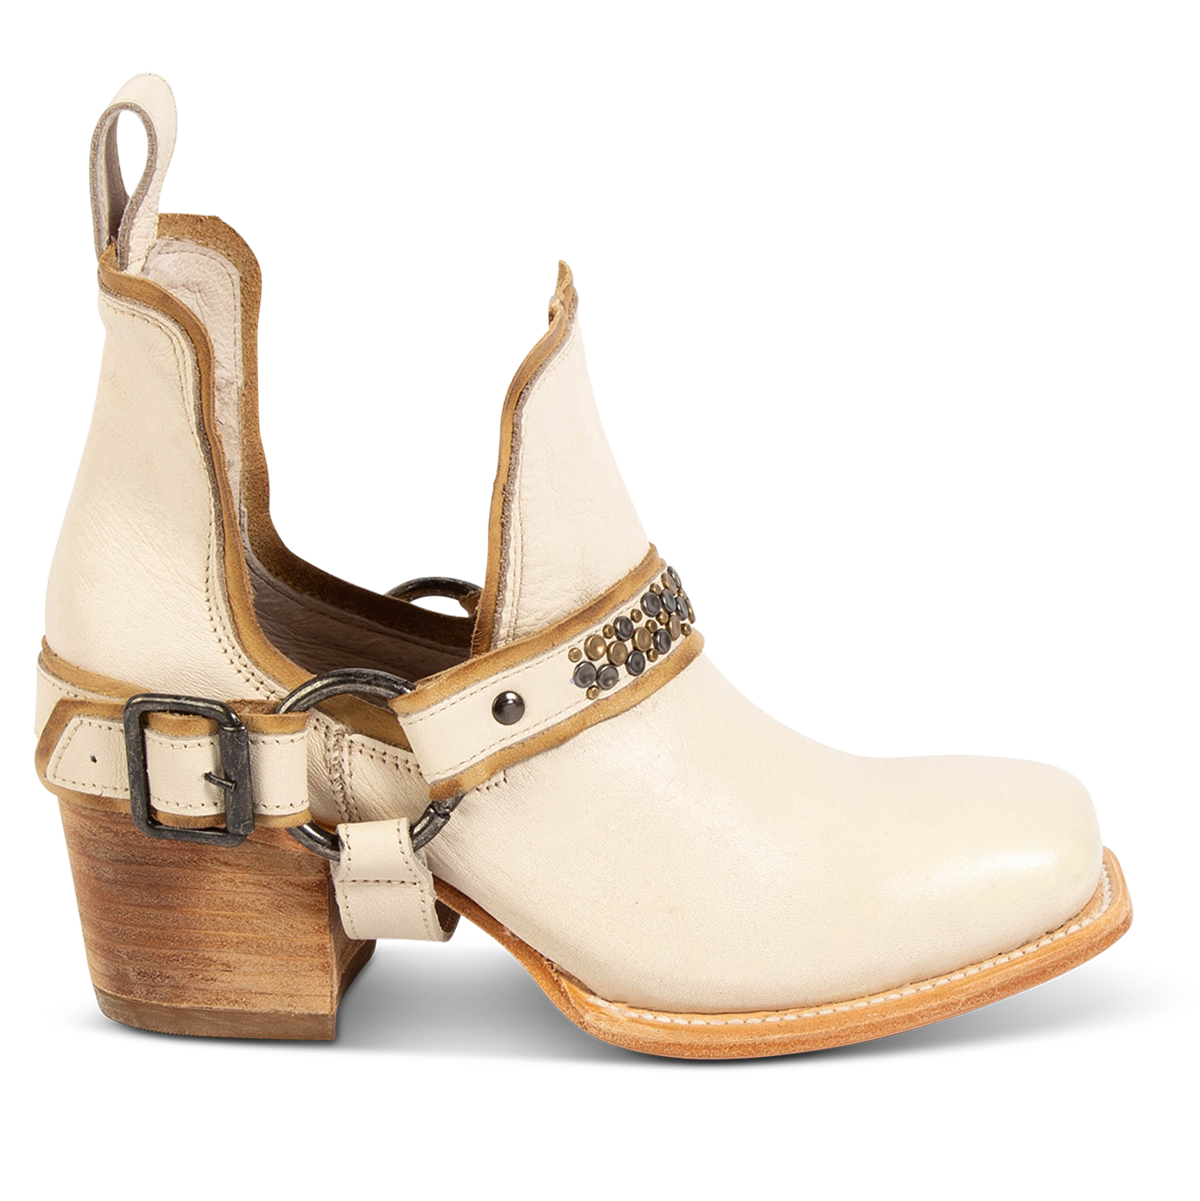 FREEBIRD women's Dusty off white bootie with studded embellishments, an ankle harness and a slip on leather pull strap